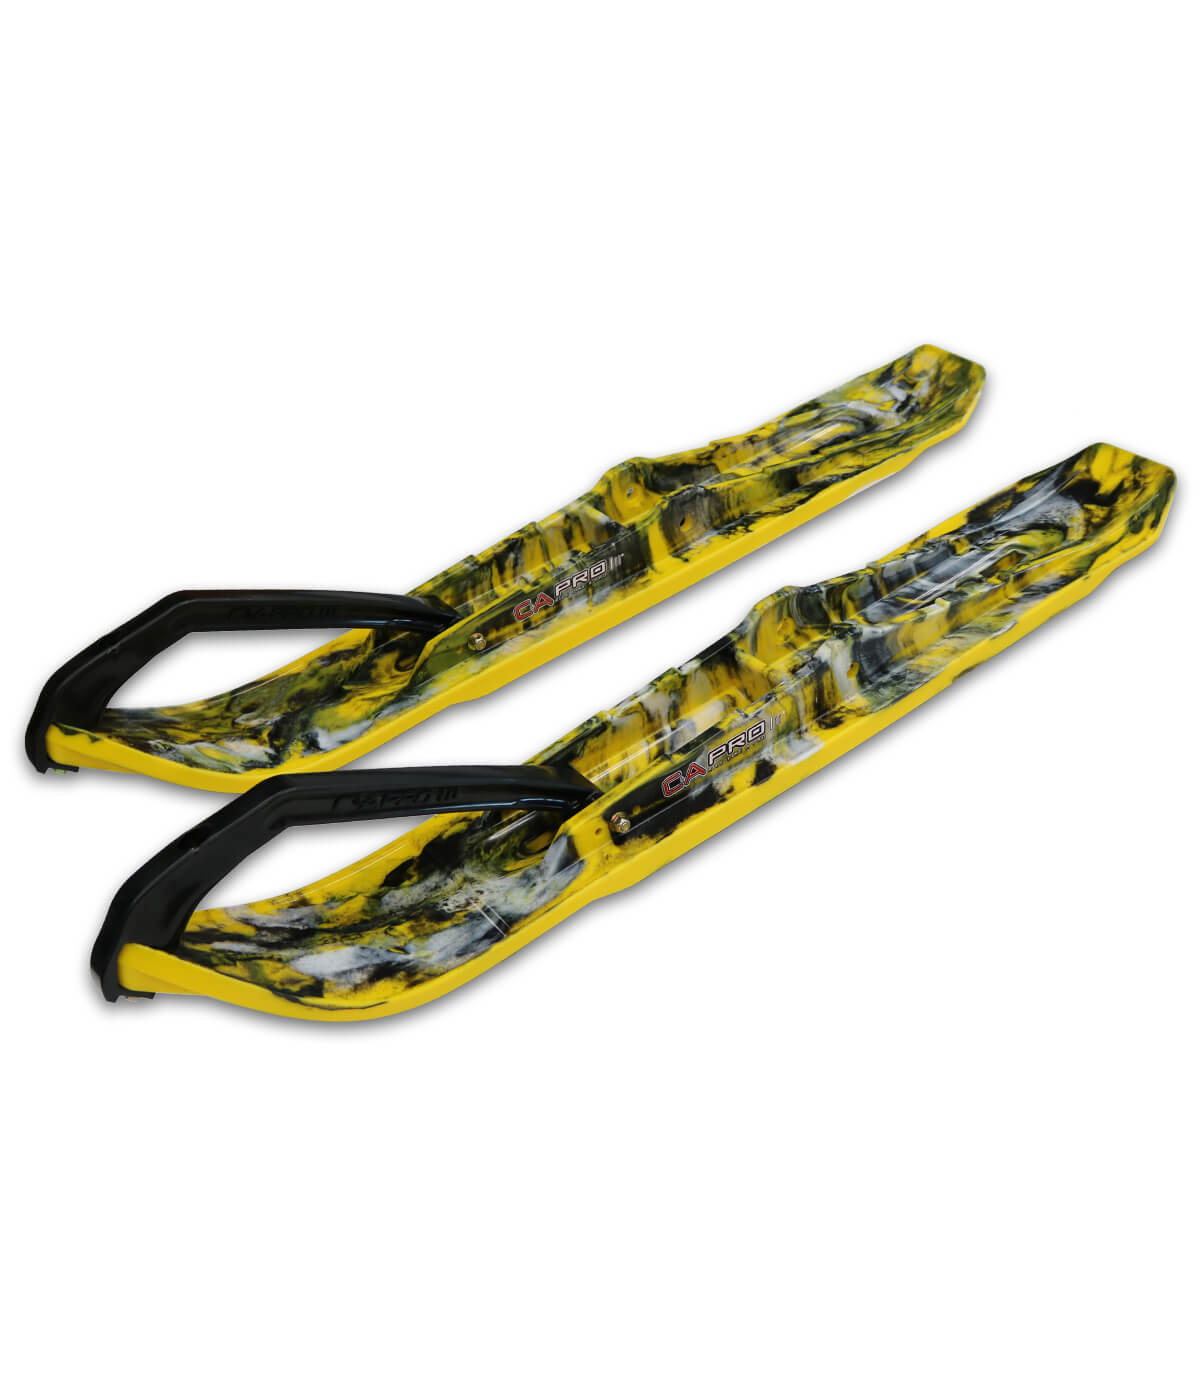 Custom yellow XPT skis with black and white accents and black handles